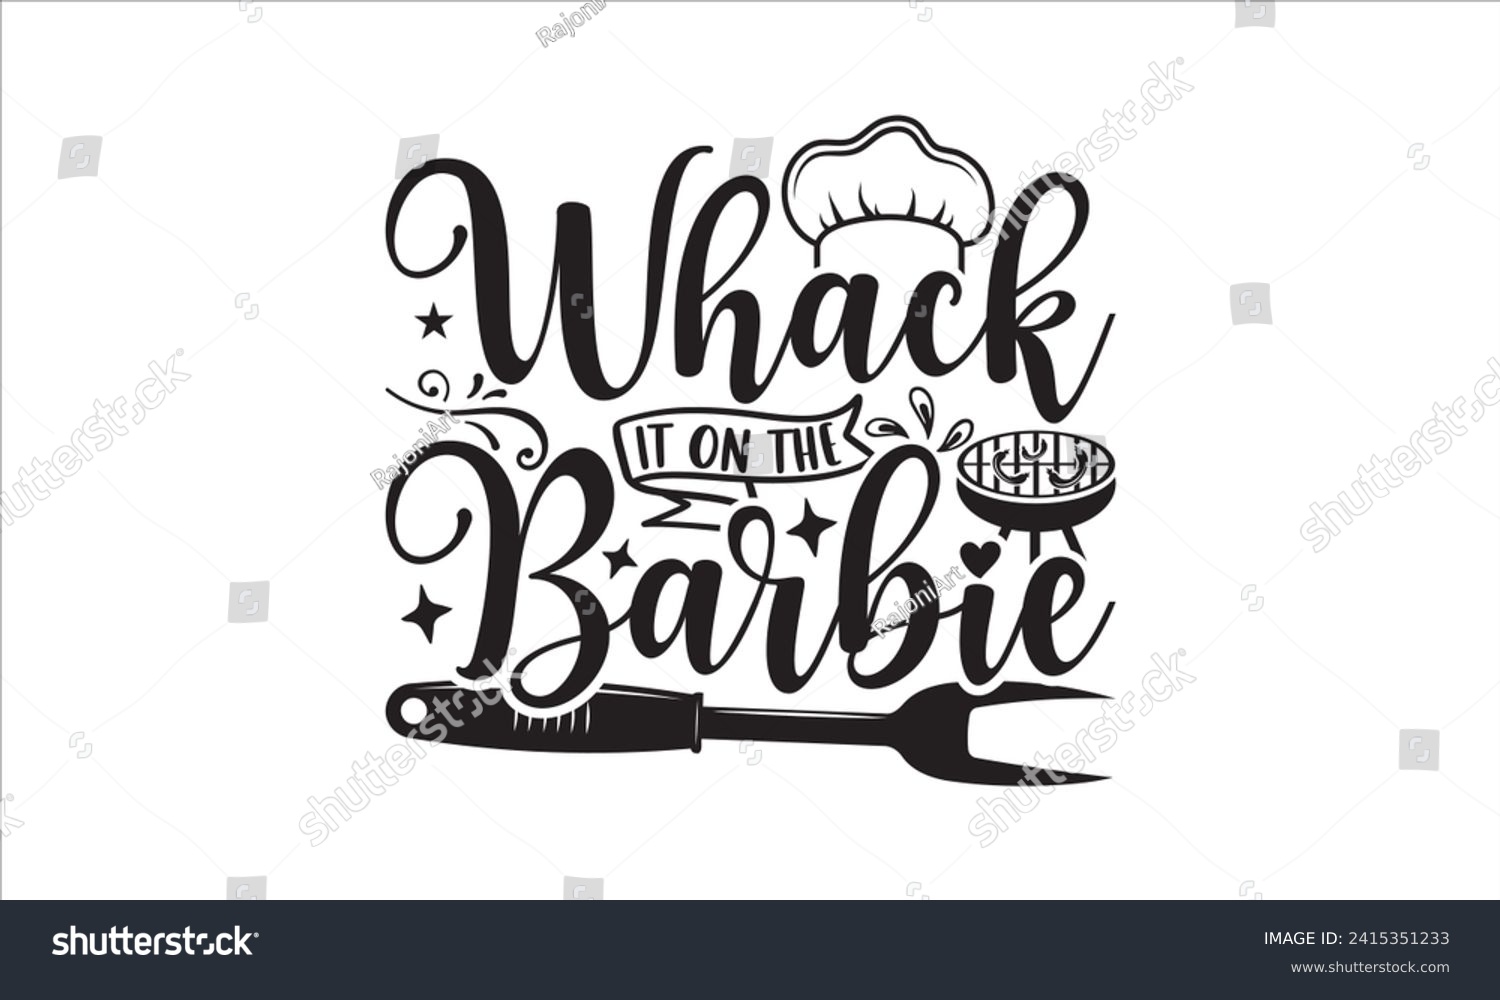 SVG of Whack it on the Barbie - Barbecue T-Shirt Design, Hand drawn vintage illustration with lettering and decoration elements, used for prints on bags, poster, banner,  pillows. svg